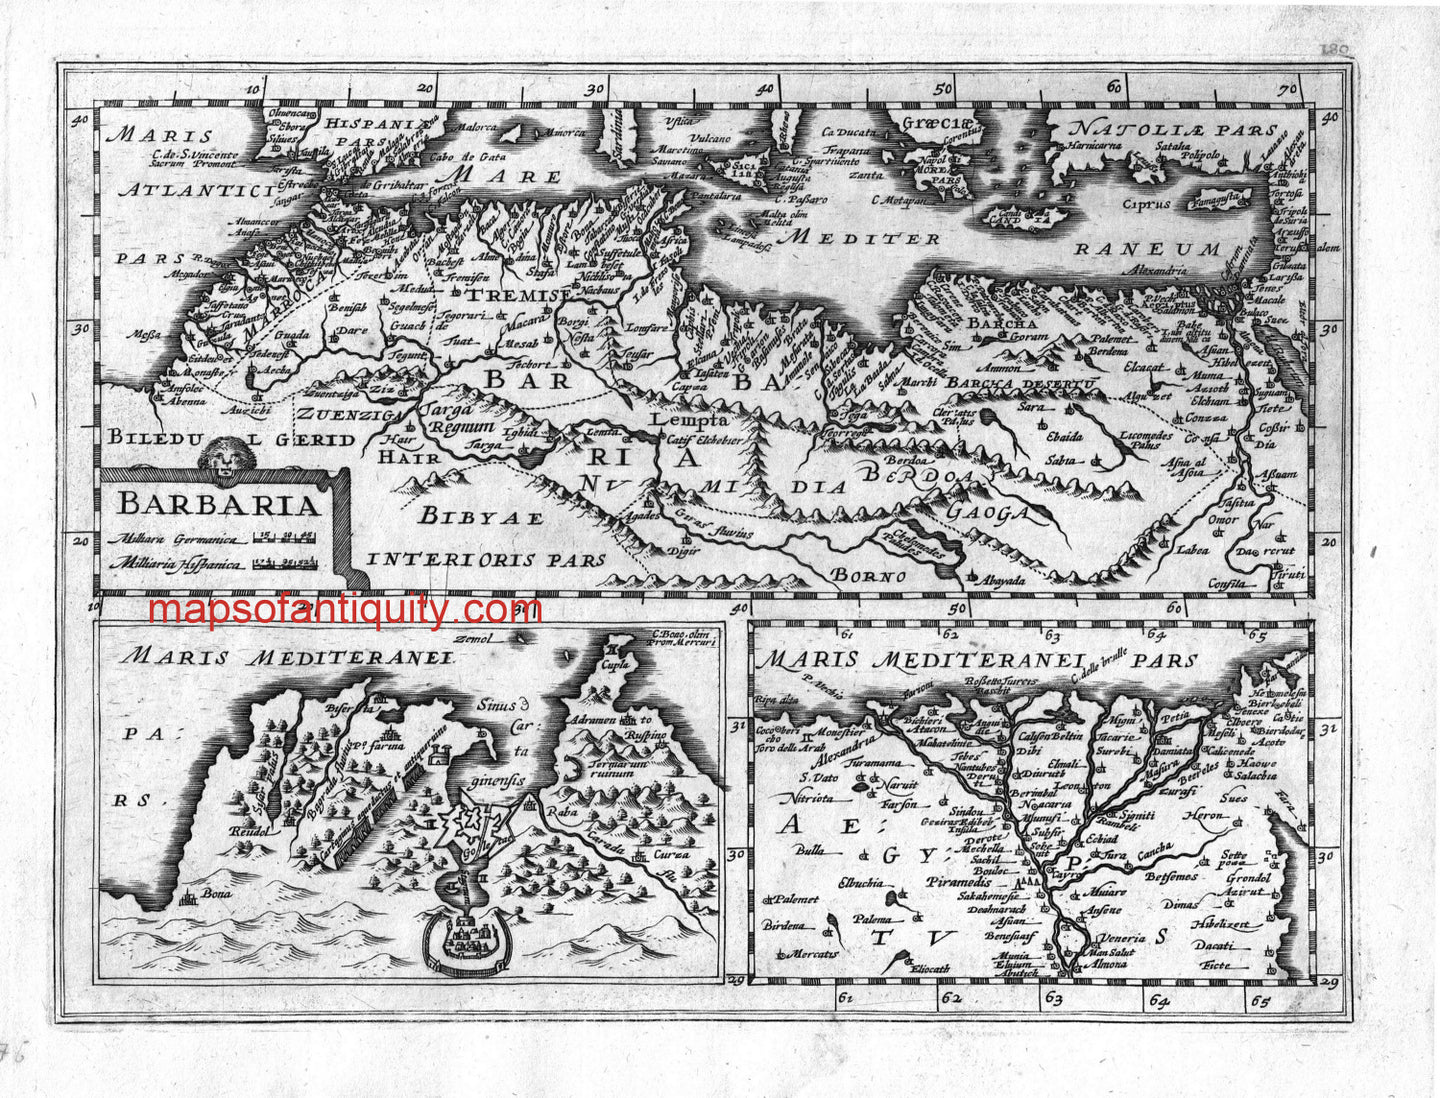 Black-&-White-Engraved-Antique-Map-Barbaria-Africa--1632-Mercator-Maps-Of-Antiquity